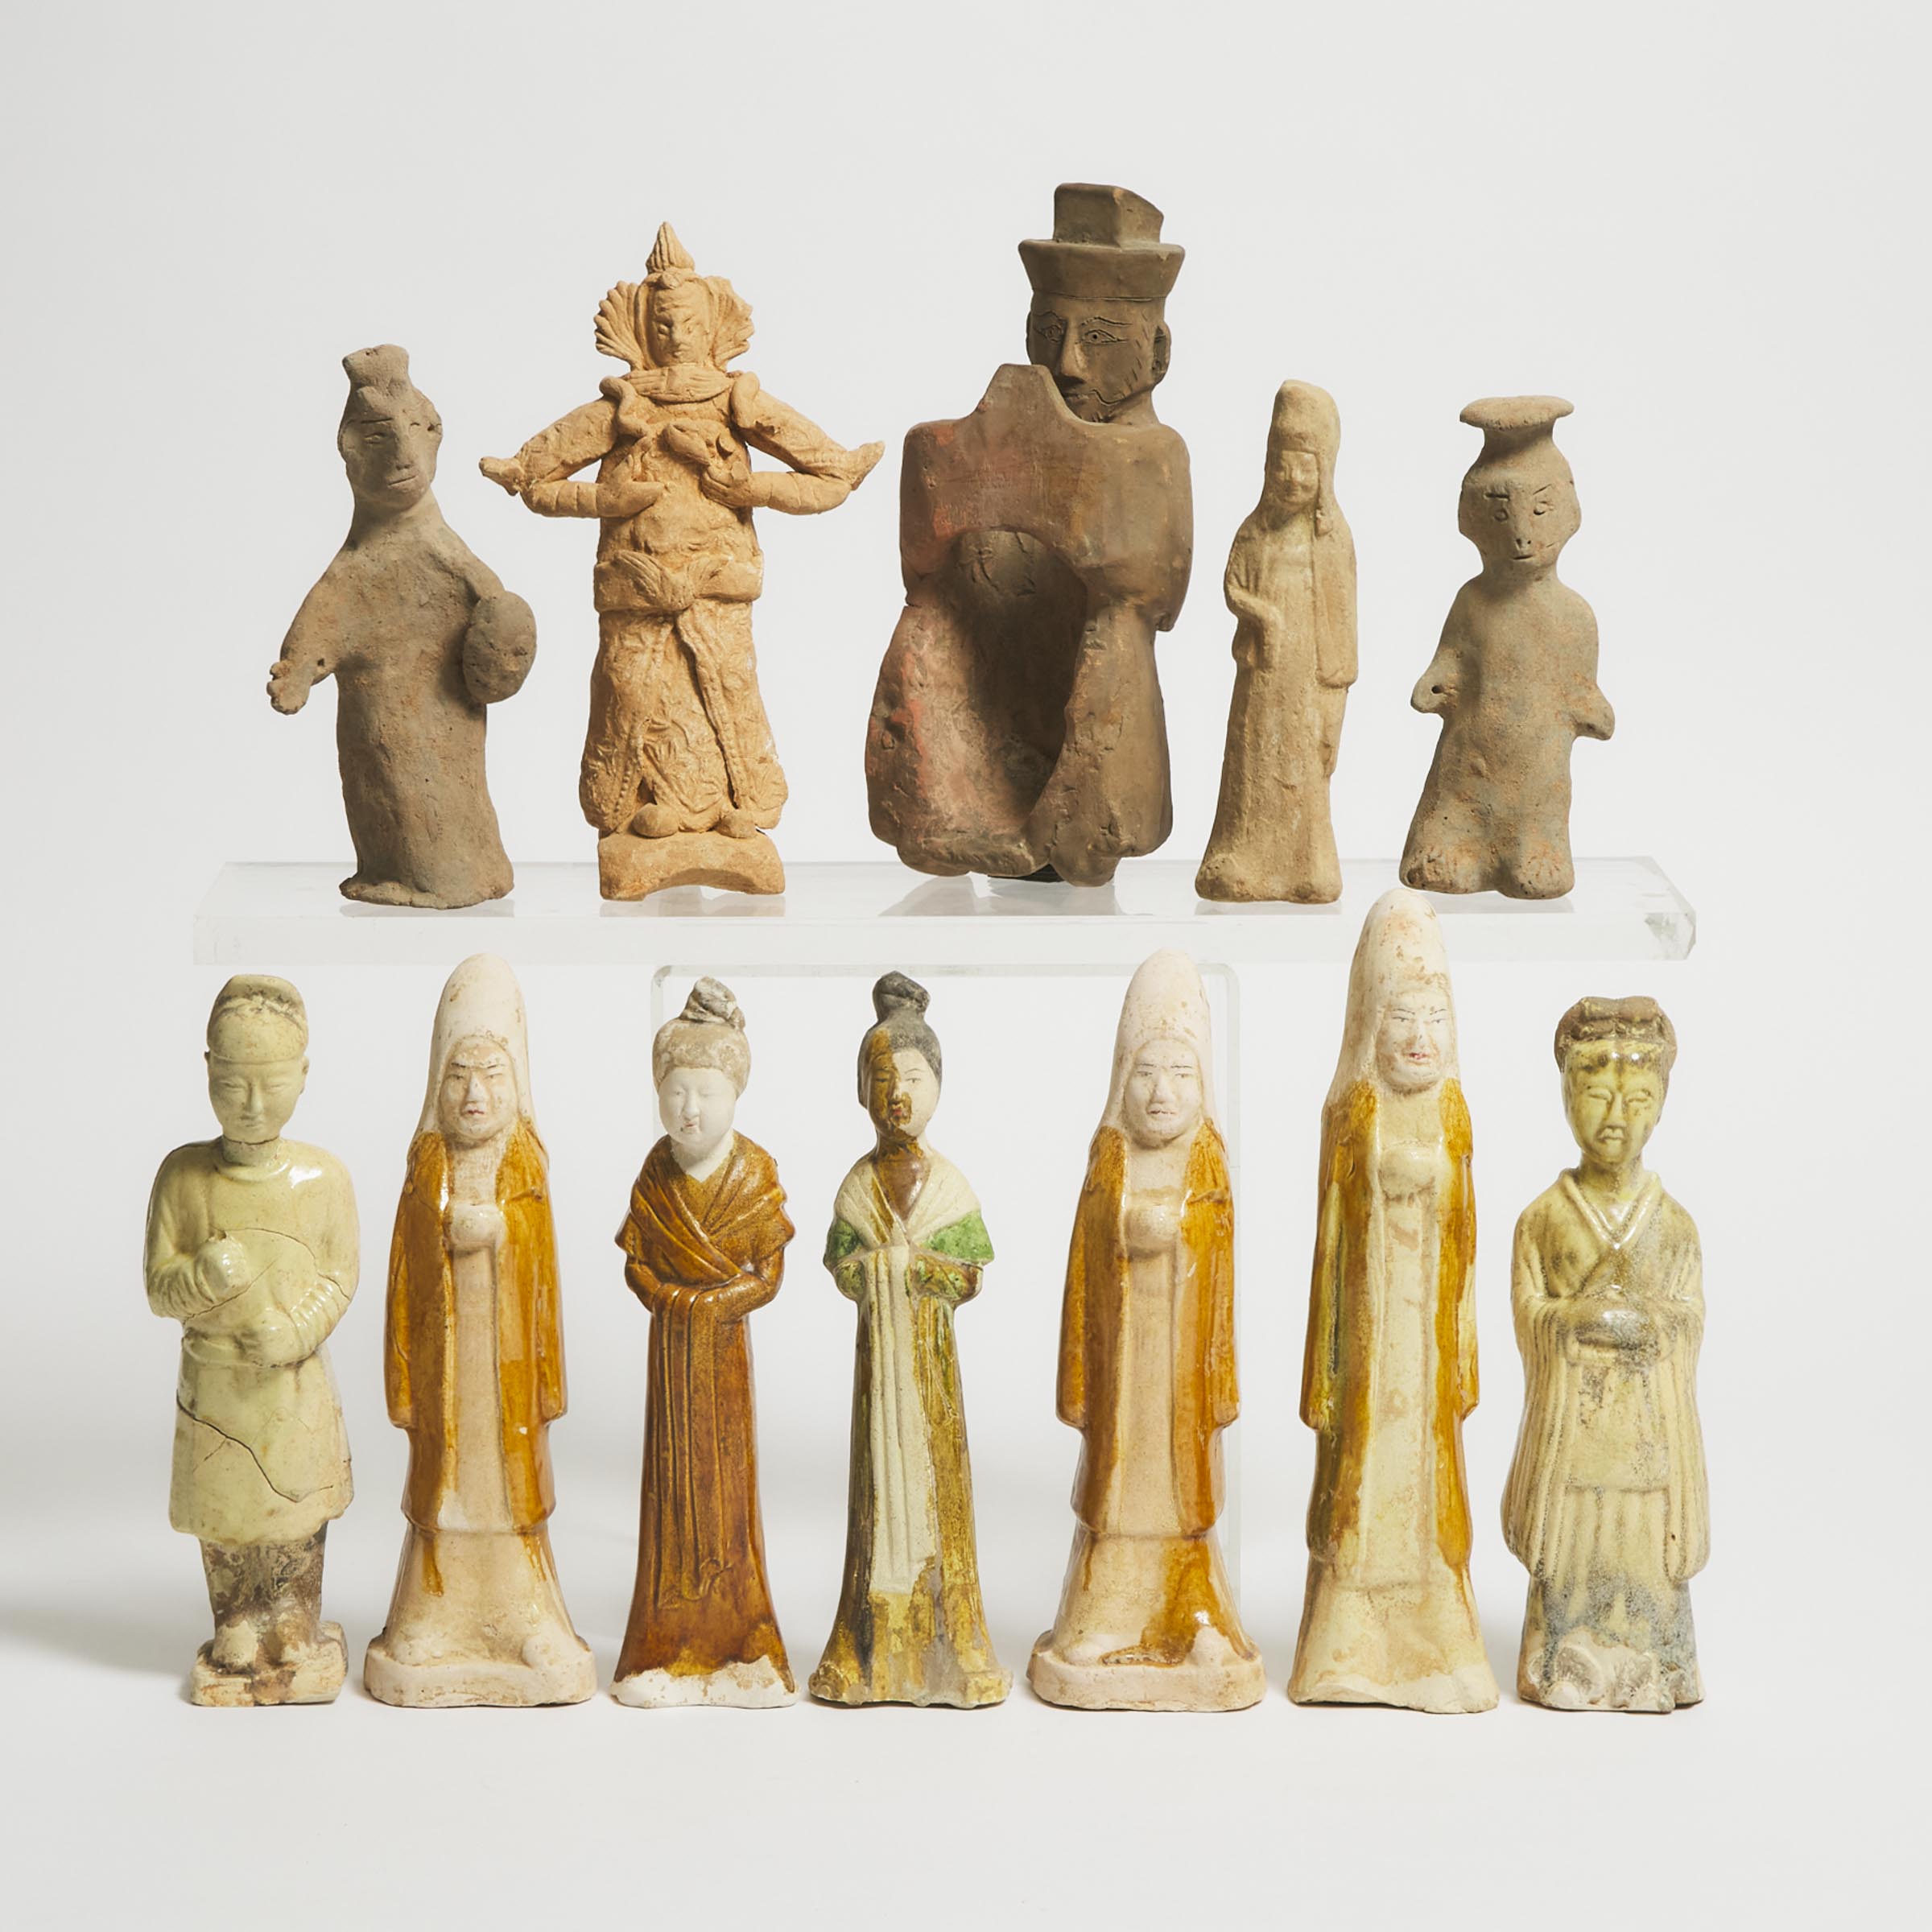 A Group of Twelve Pottery Figures, Han-Tang Dynasty (206 BC-AD 907)